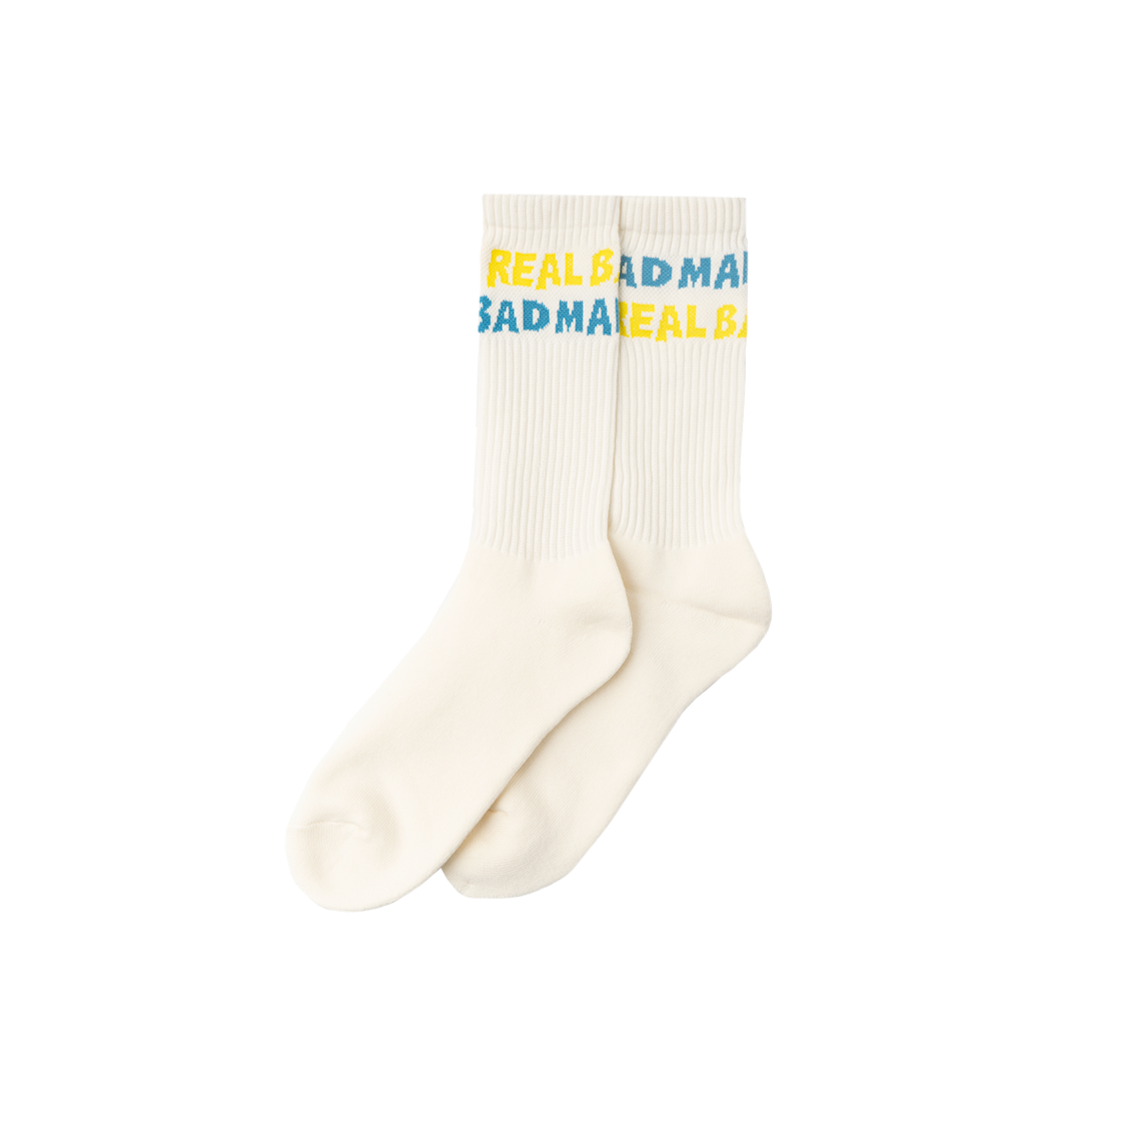 Real Bad Spellout Socks - Yellow / Blue